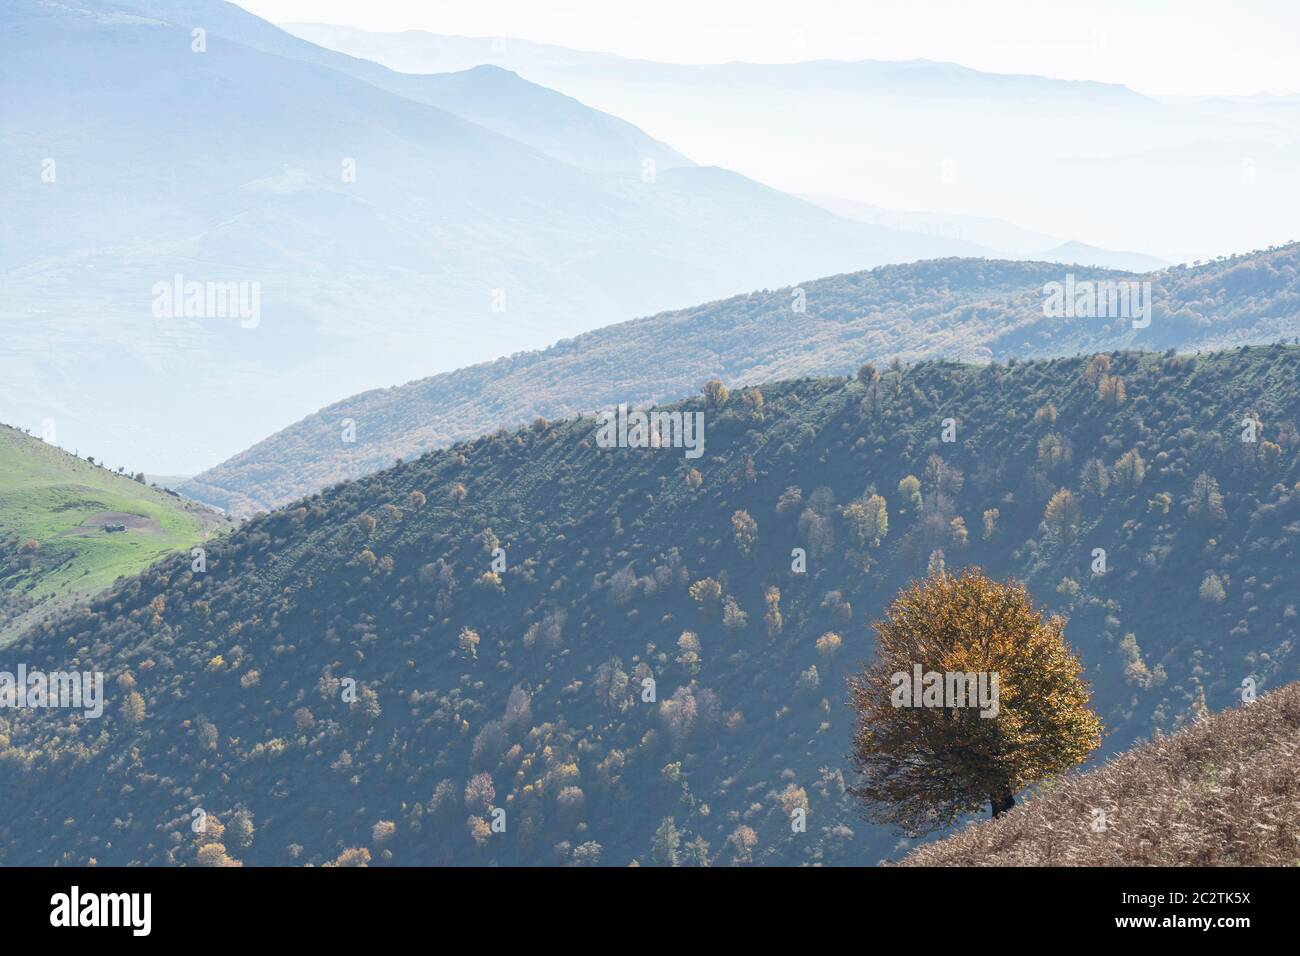 Stunning autumn nature landscape with a single tree at foreground, Arial perspective mist in the background. Horizontal shot Stock Photo